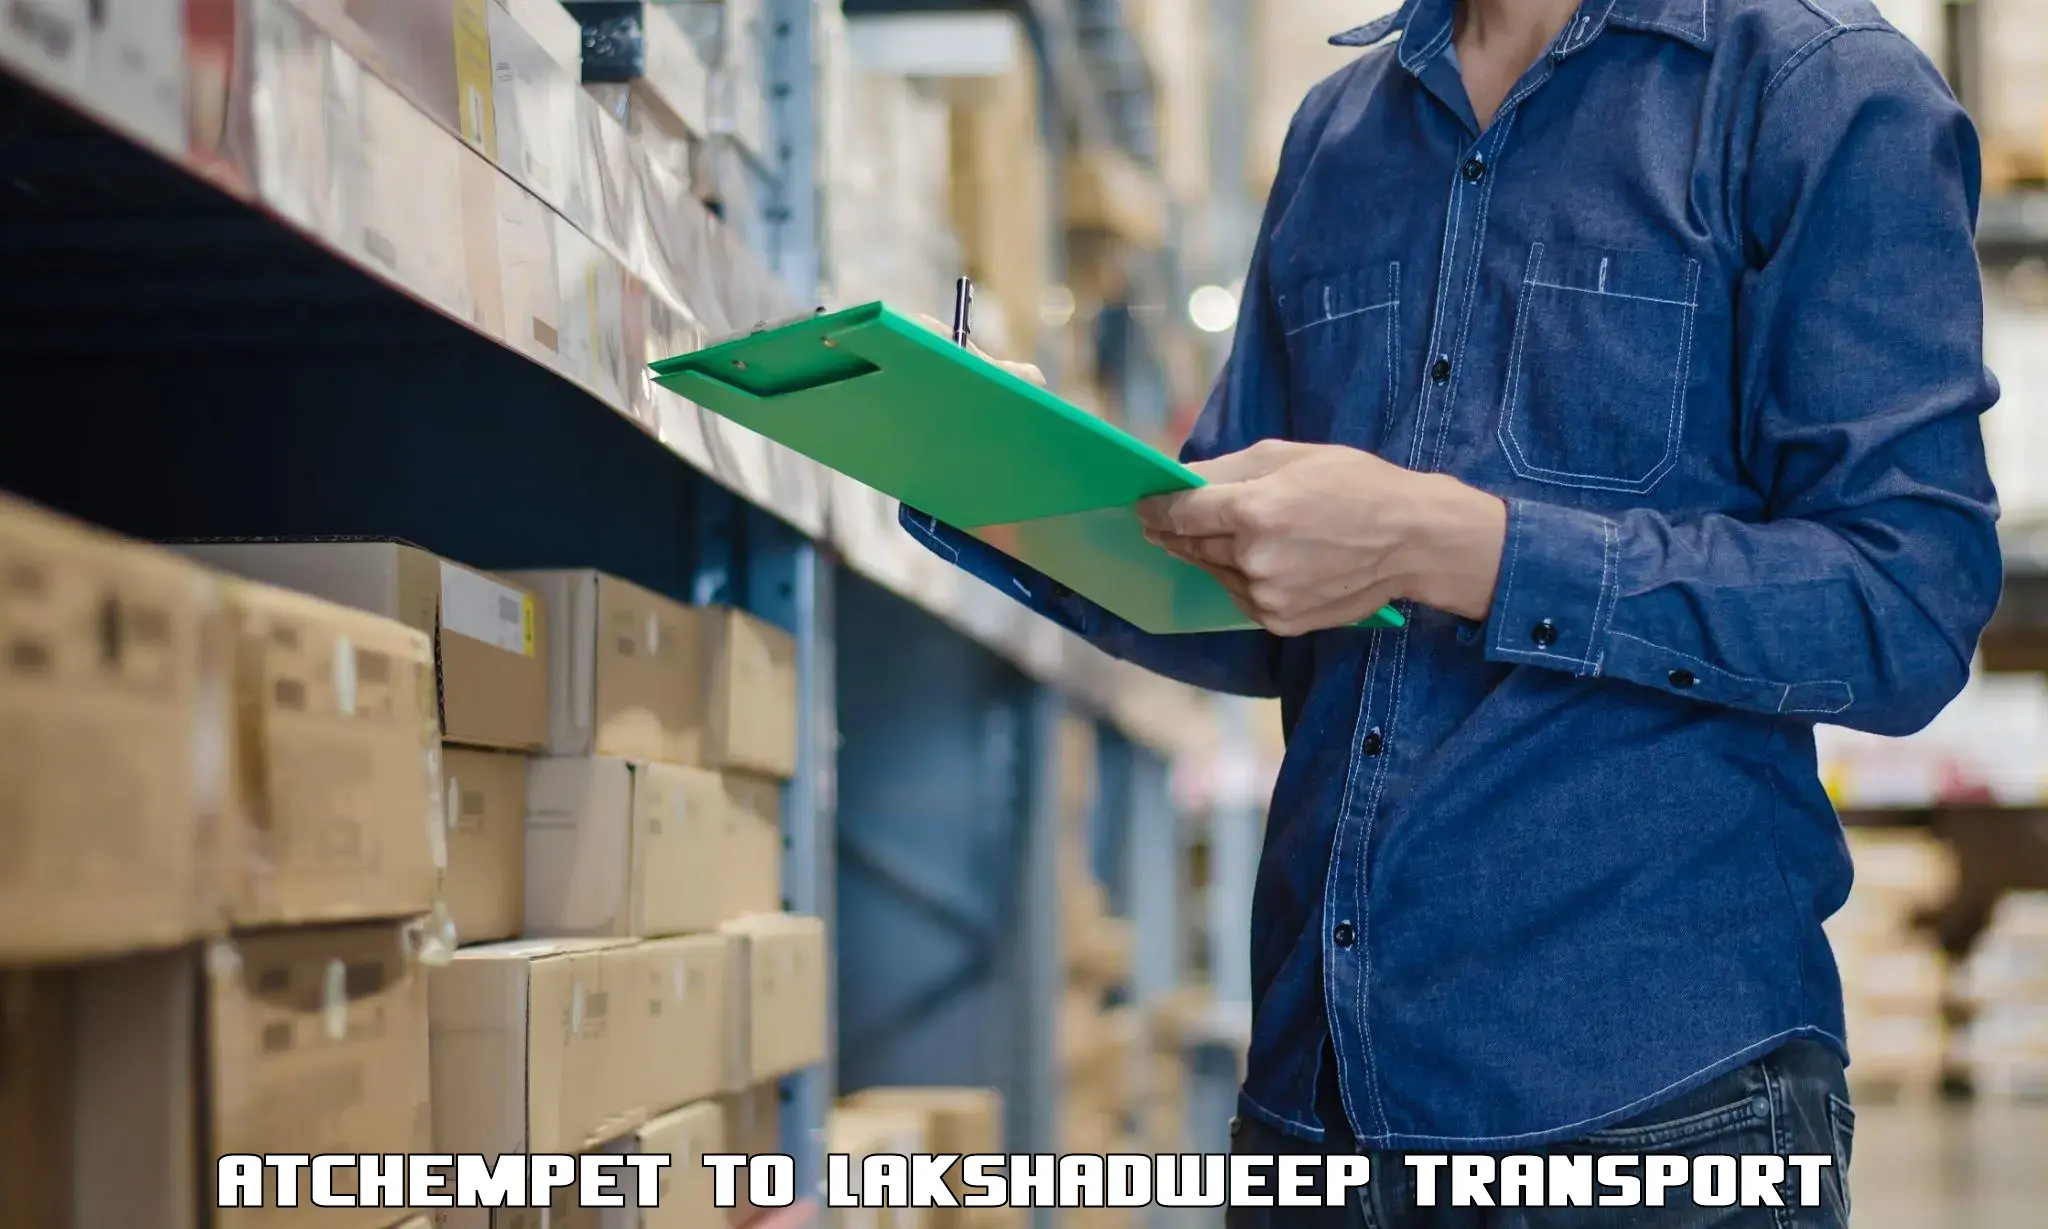 Container transport service Atchempet to Lakshadweep